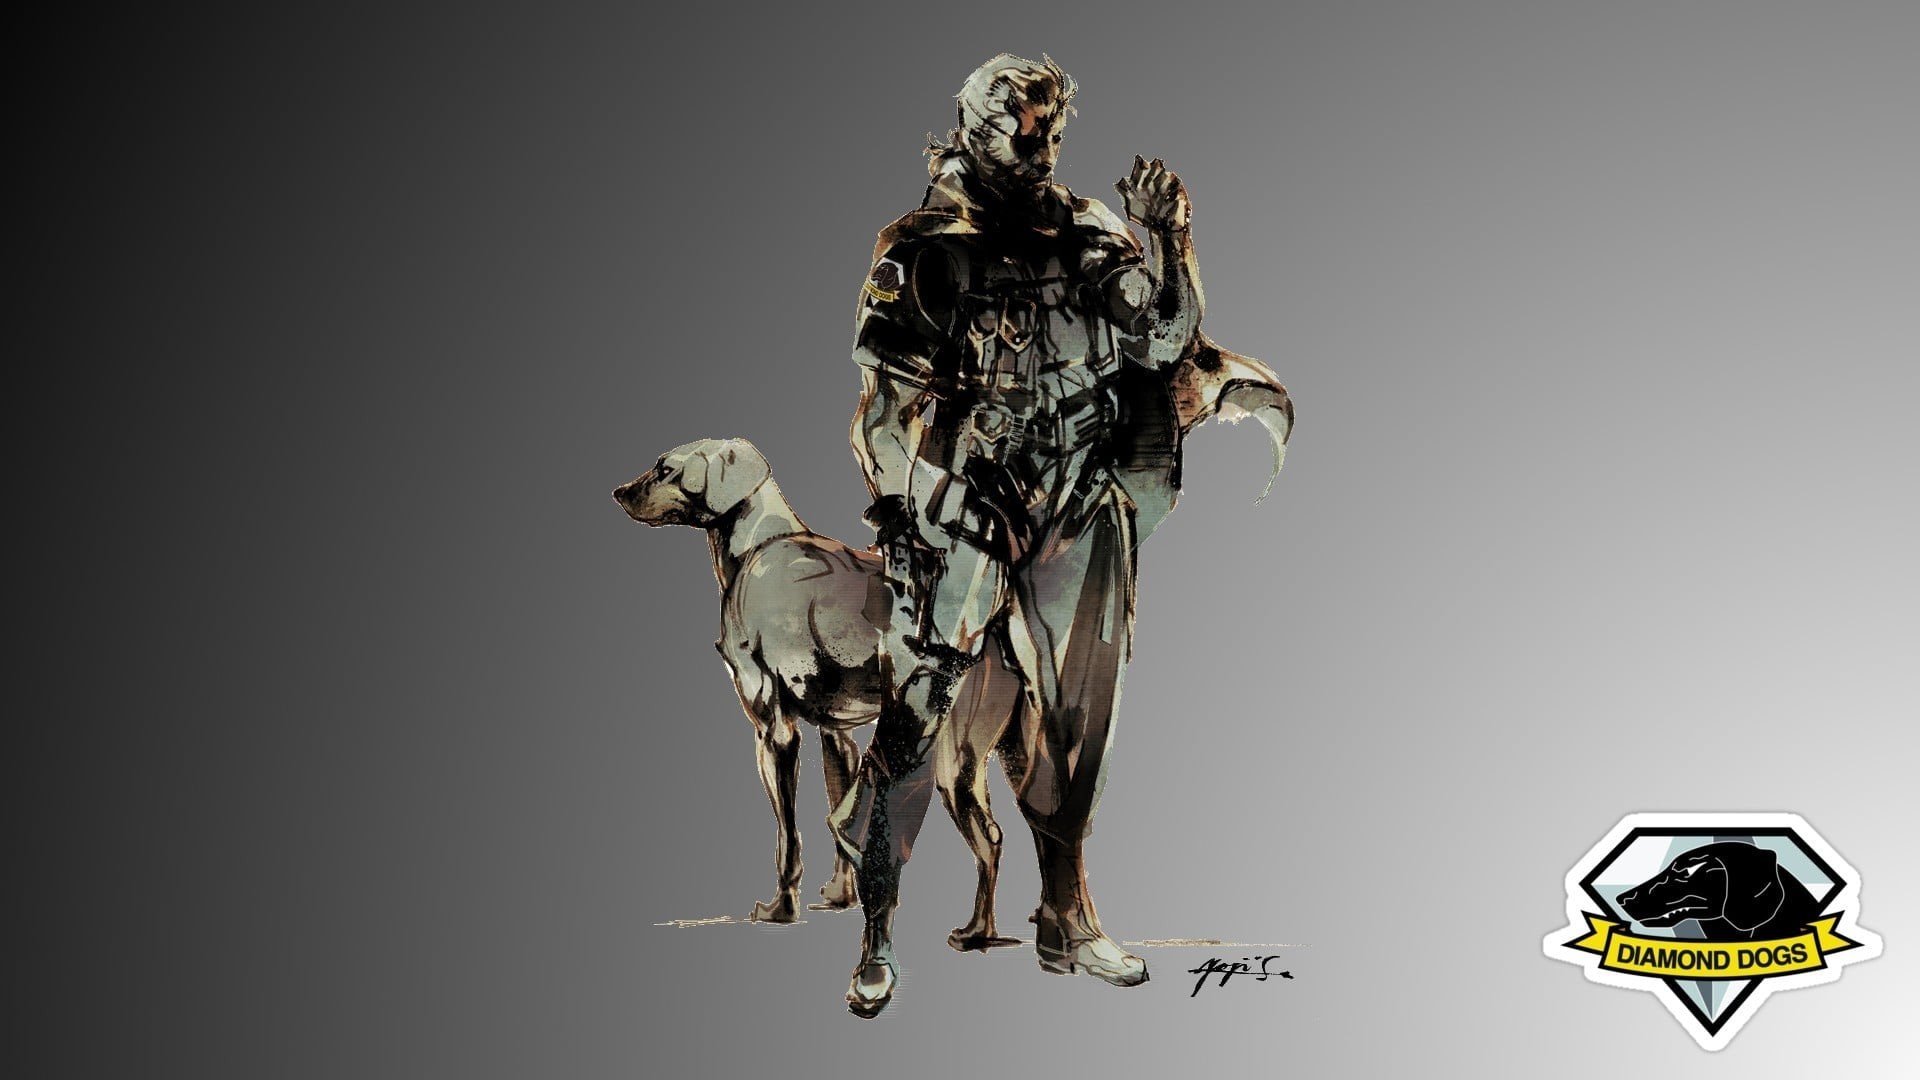 1920x1080 Metal Gear Solid 5 The Phantom Pain free download